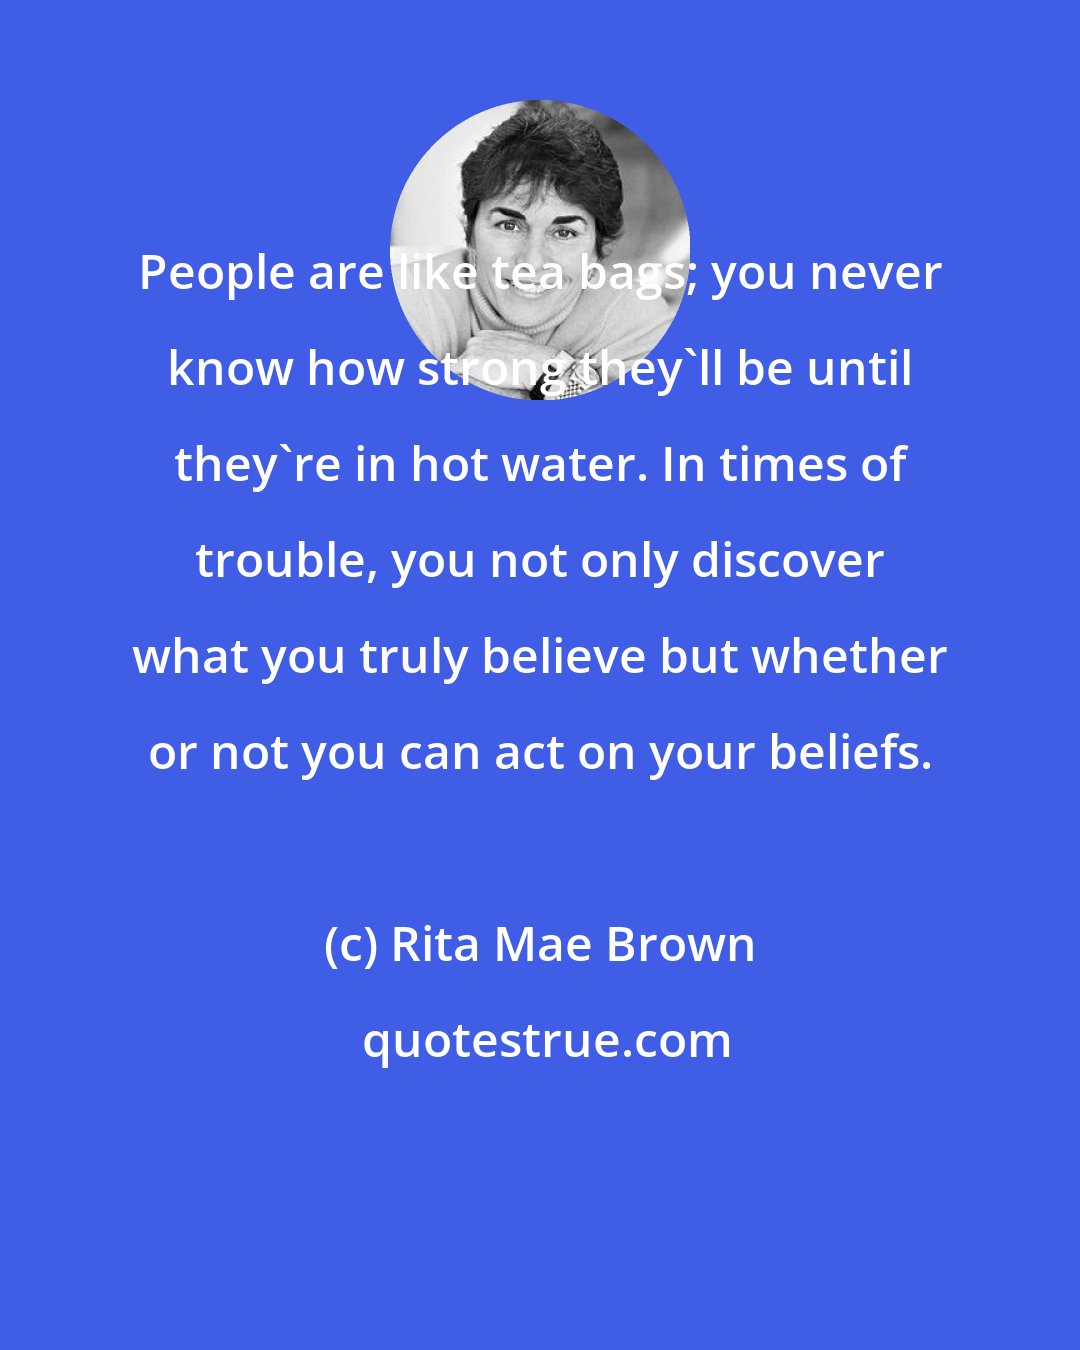 Rita Mae Brown: People are like tea bags; you never know how strong they'll be until they're in hot water. In times of trouble, you not only discover what you truly believe but whether or not you can act on your beliefs.